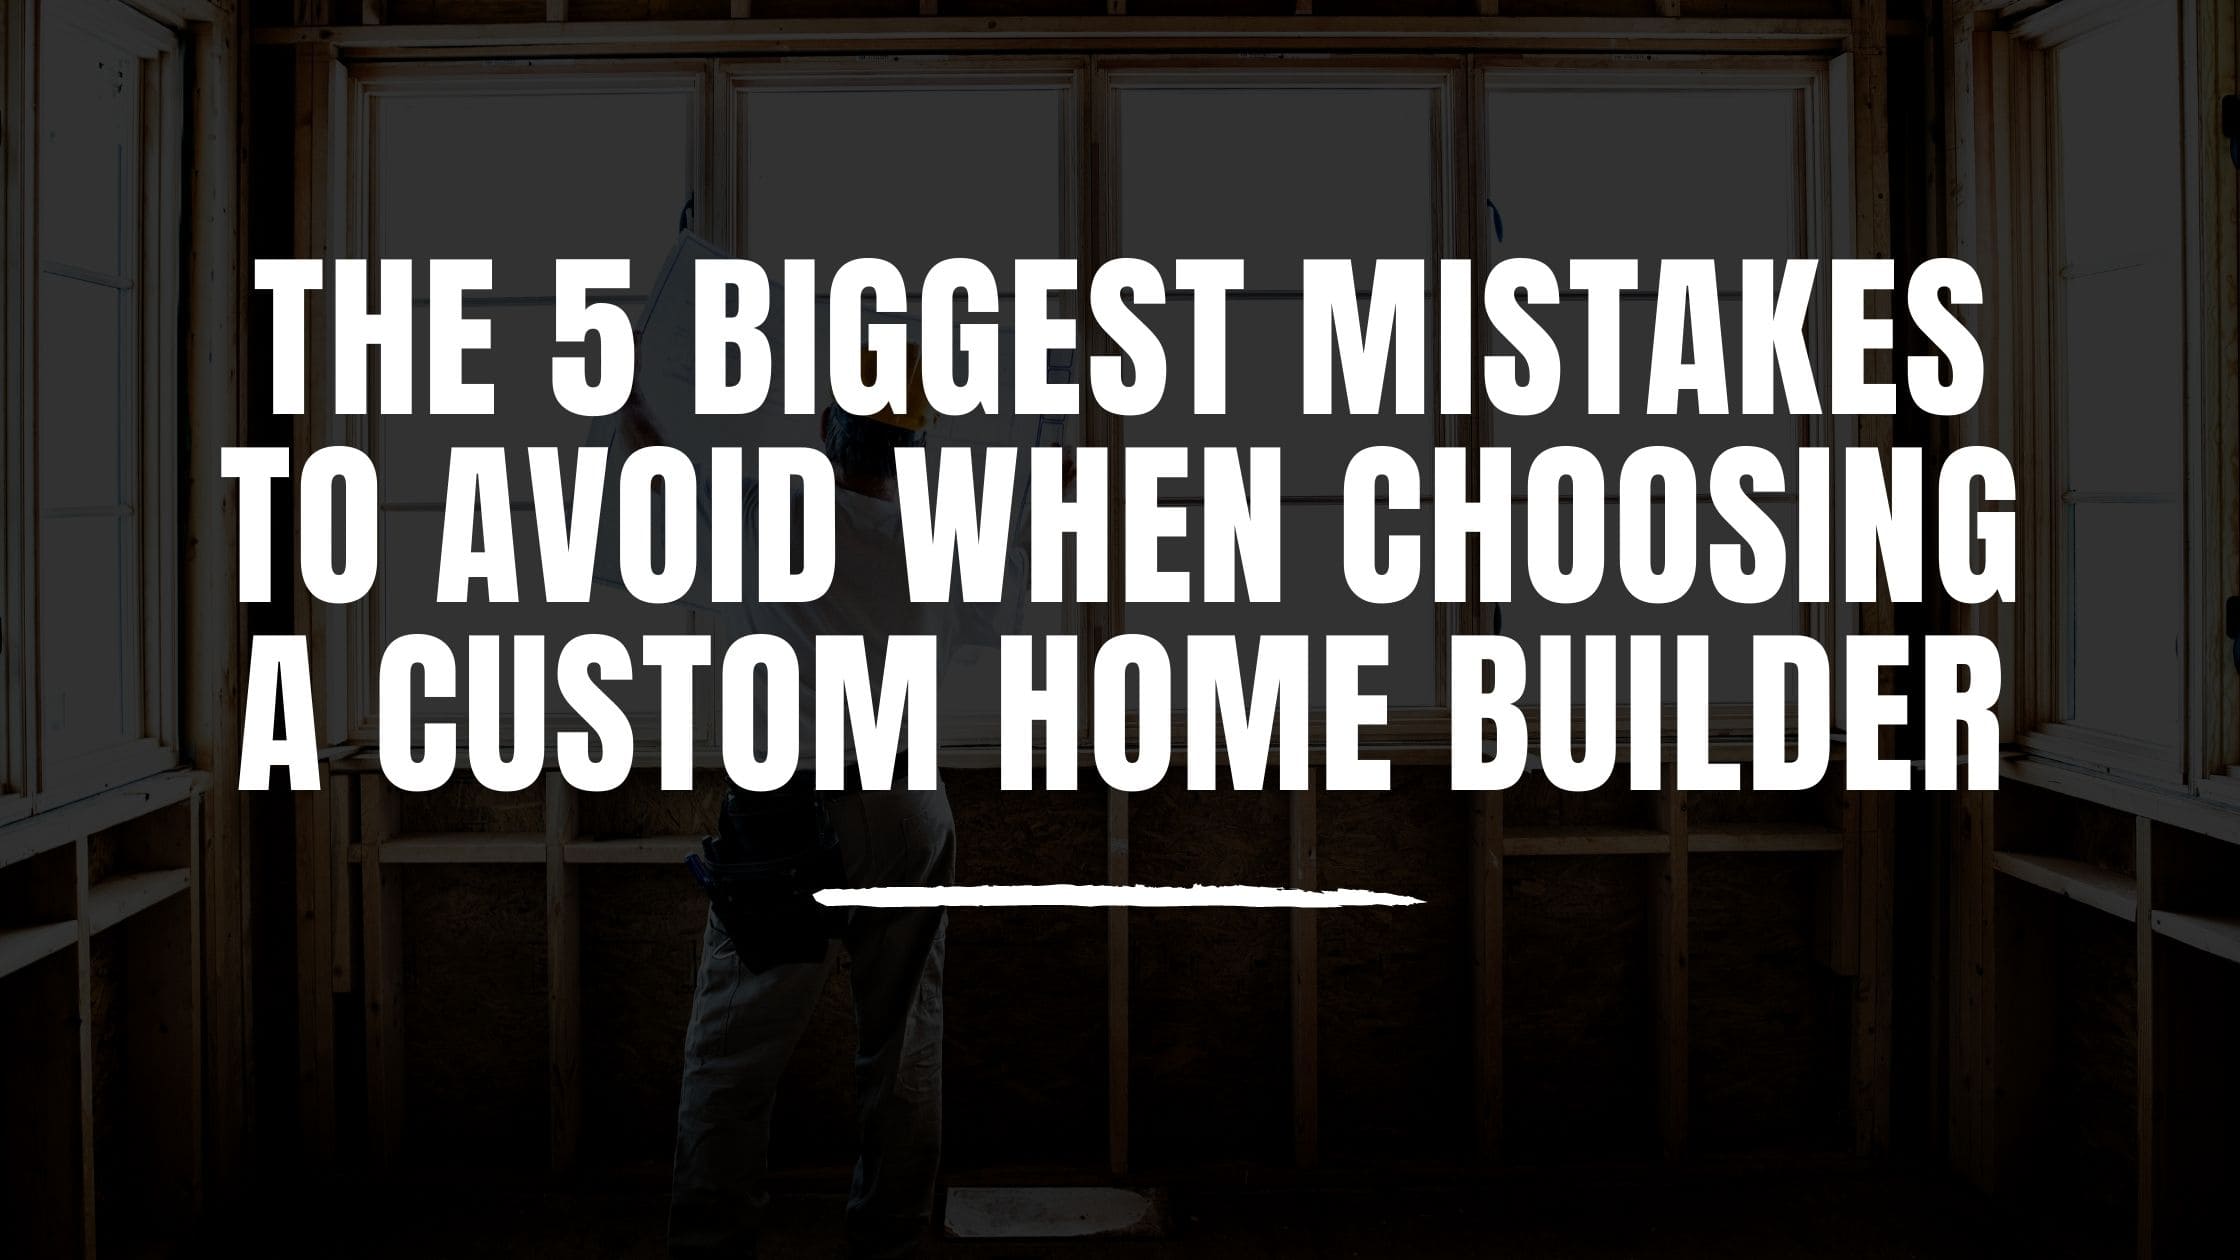 The 5 Biggest Mistakes to Avoid When Choosing a Custom Home Builder